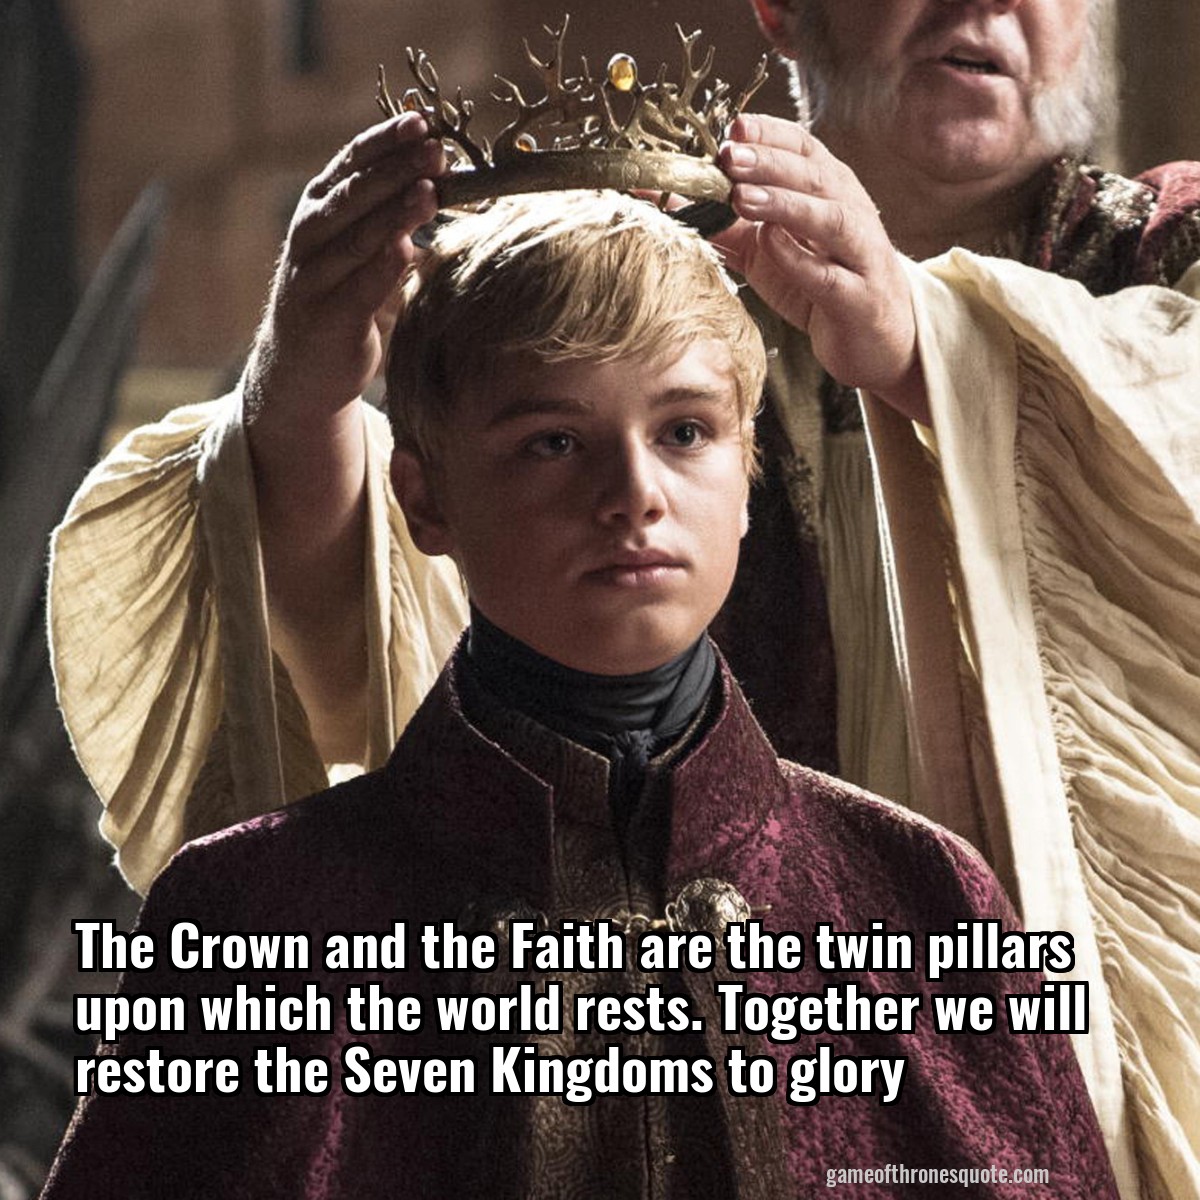 The Crown and the Faith are the twin pillars upon which the world rests. Together we will restore the Seven Kingdoms to glory